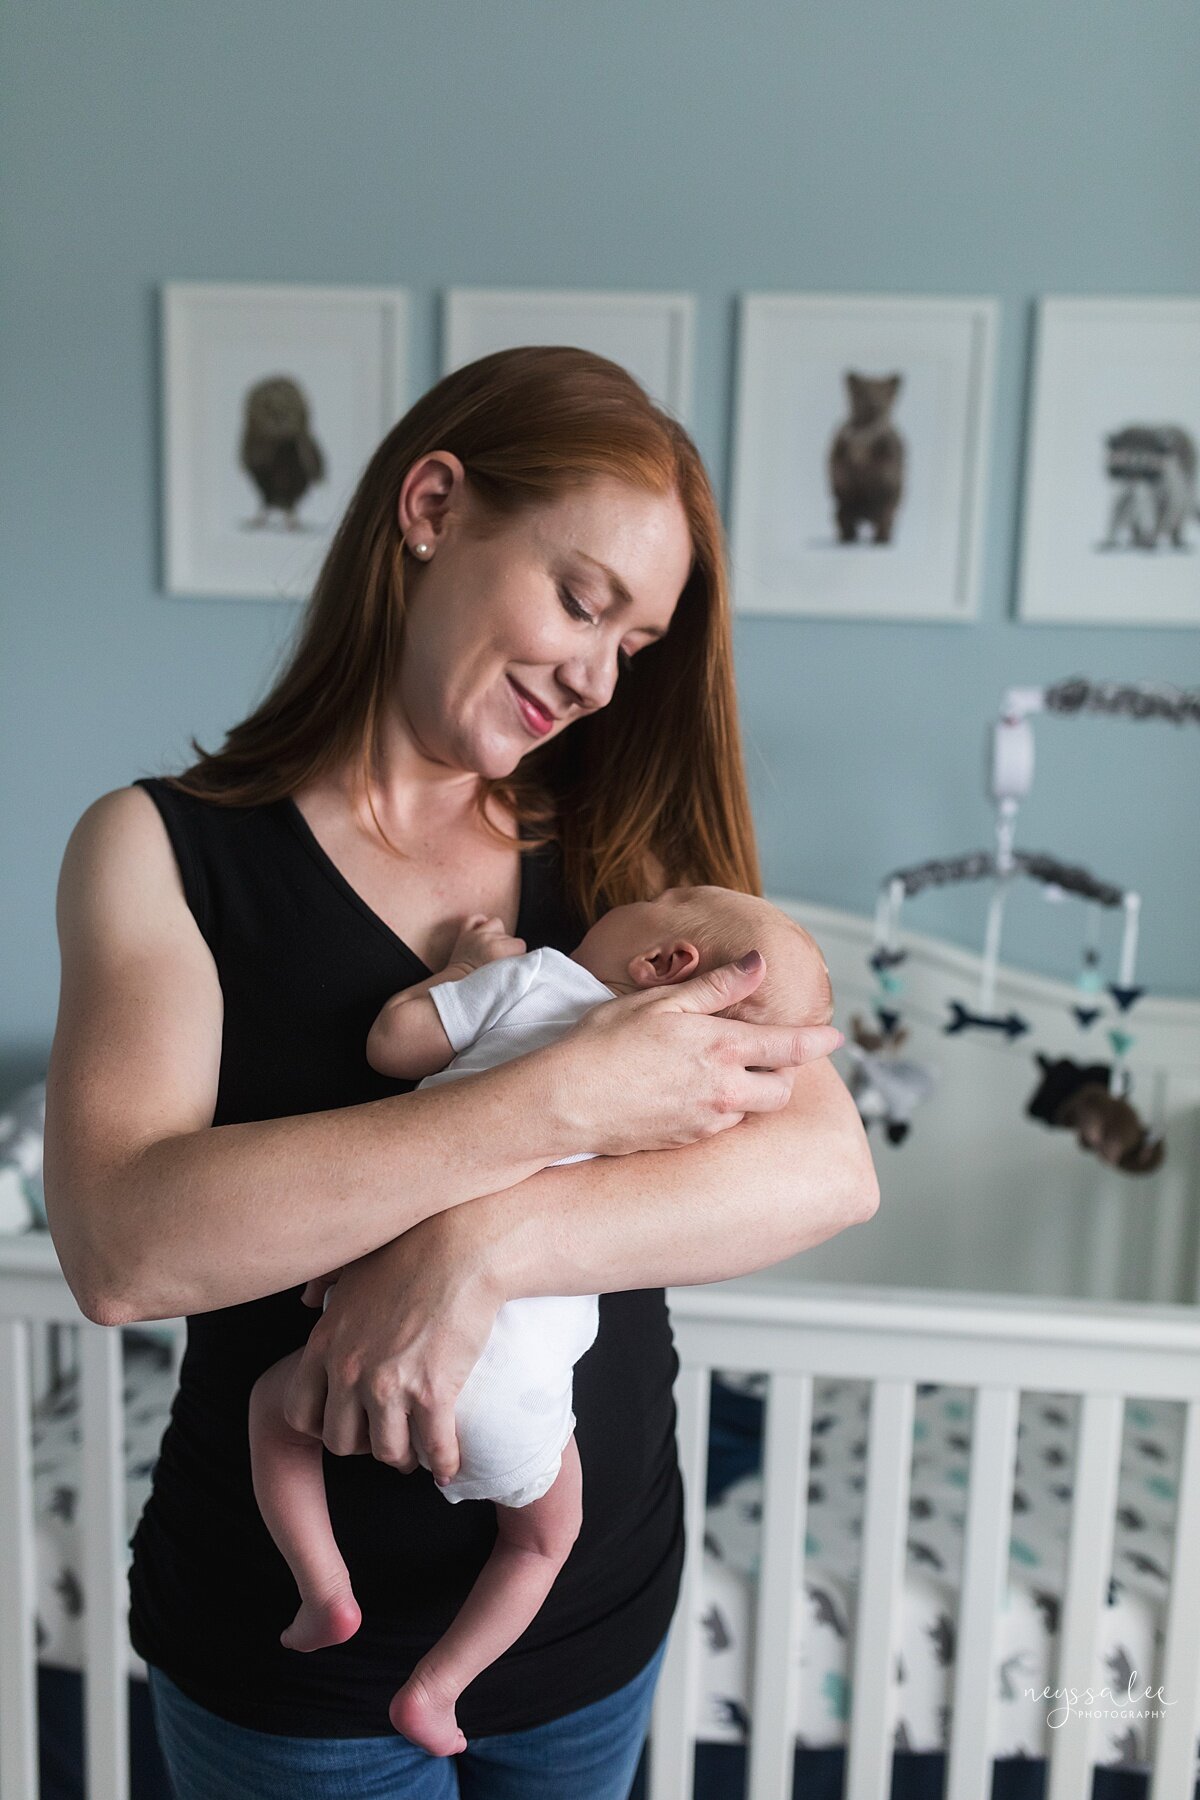  Photo of mom with baby in nursery  by Seattle Photographer